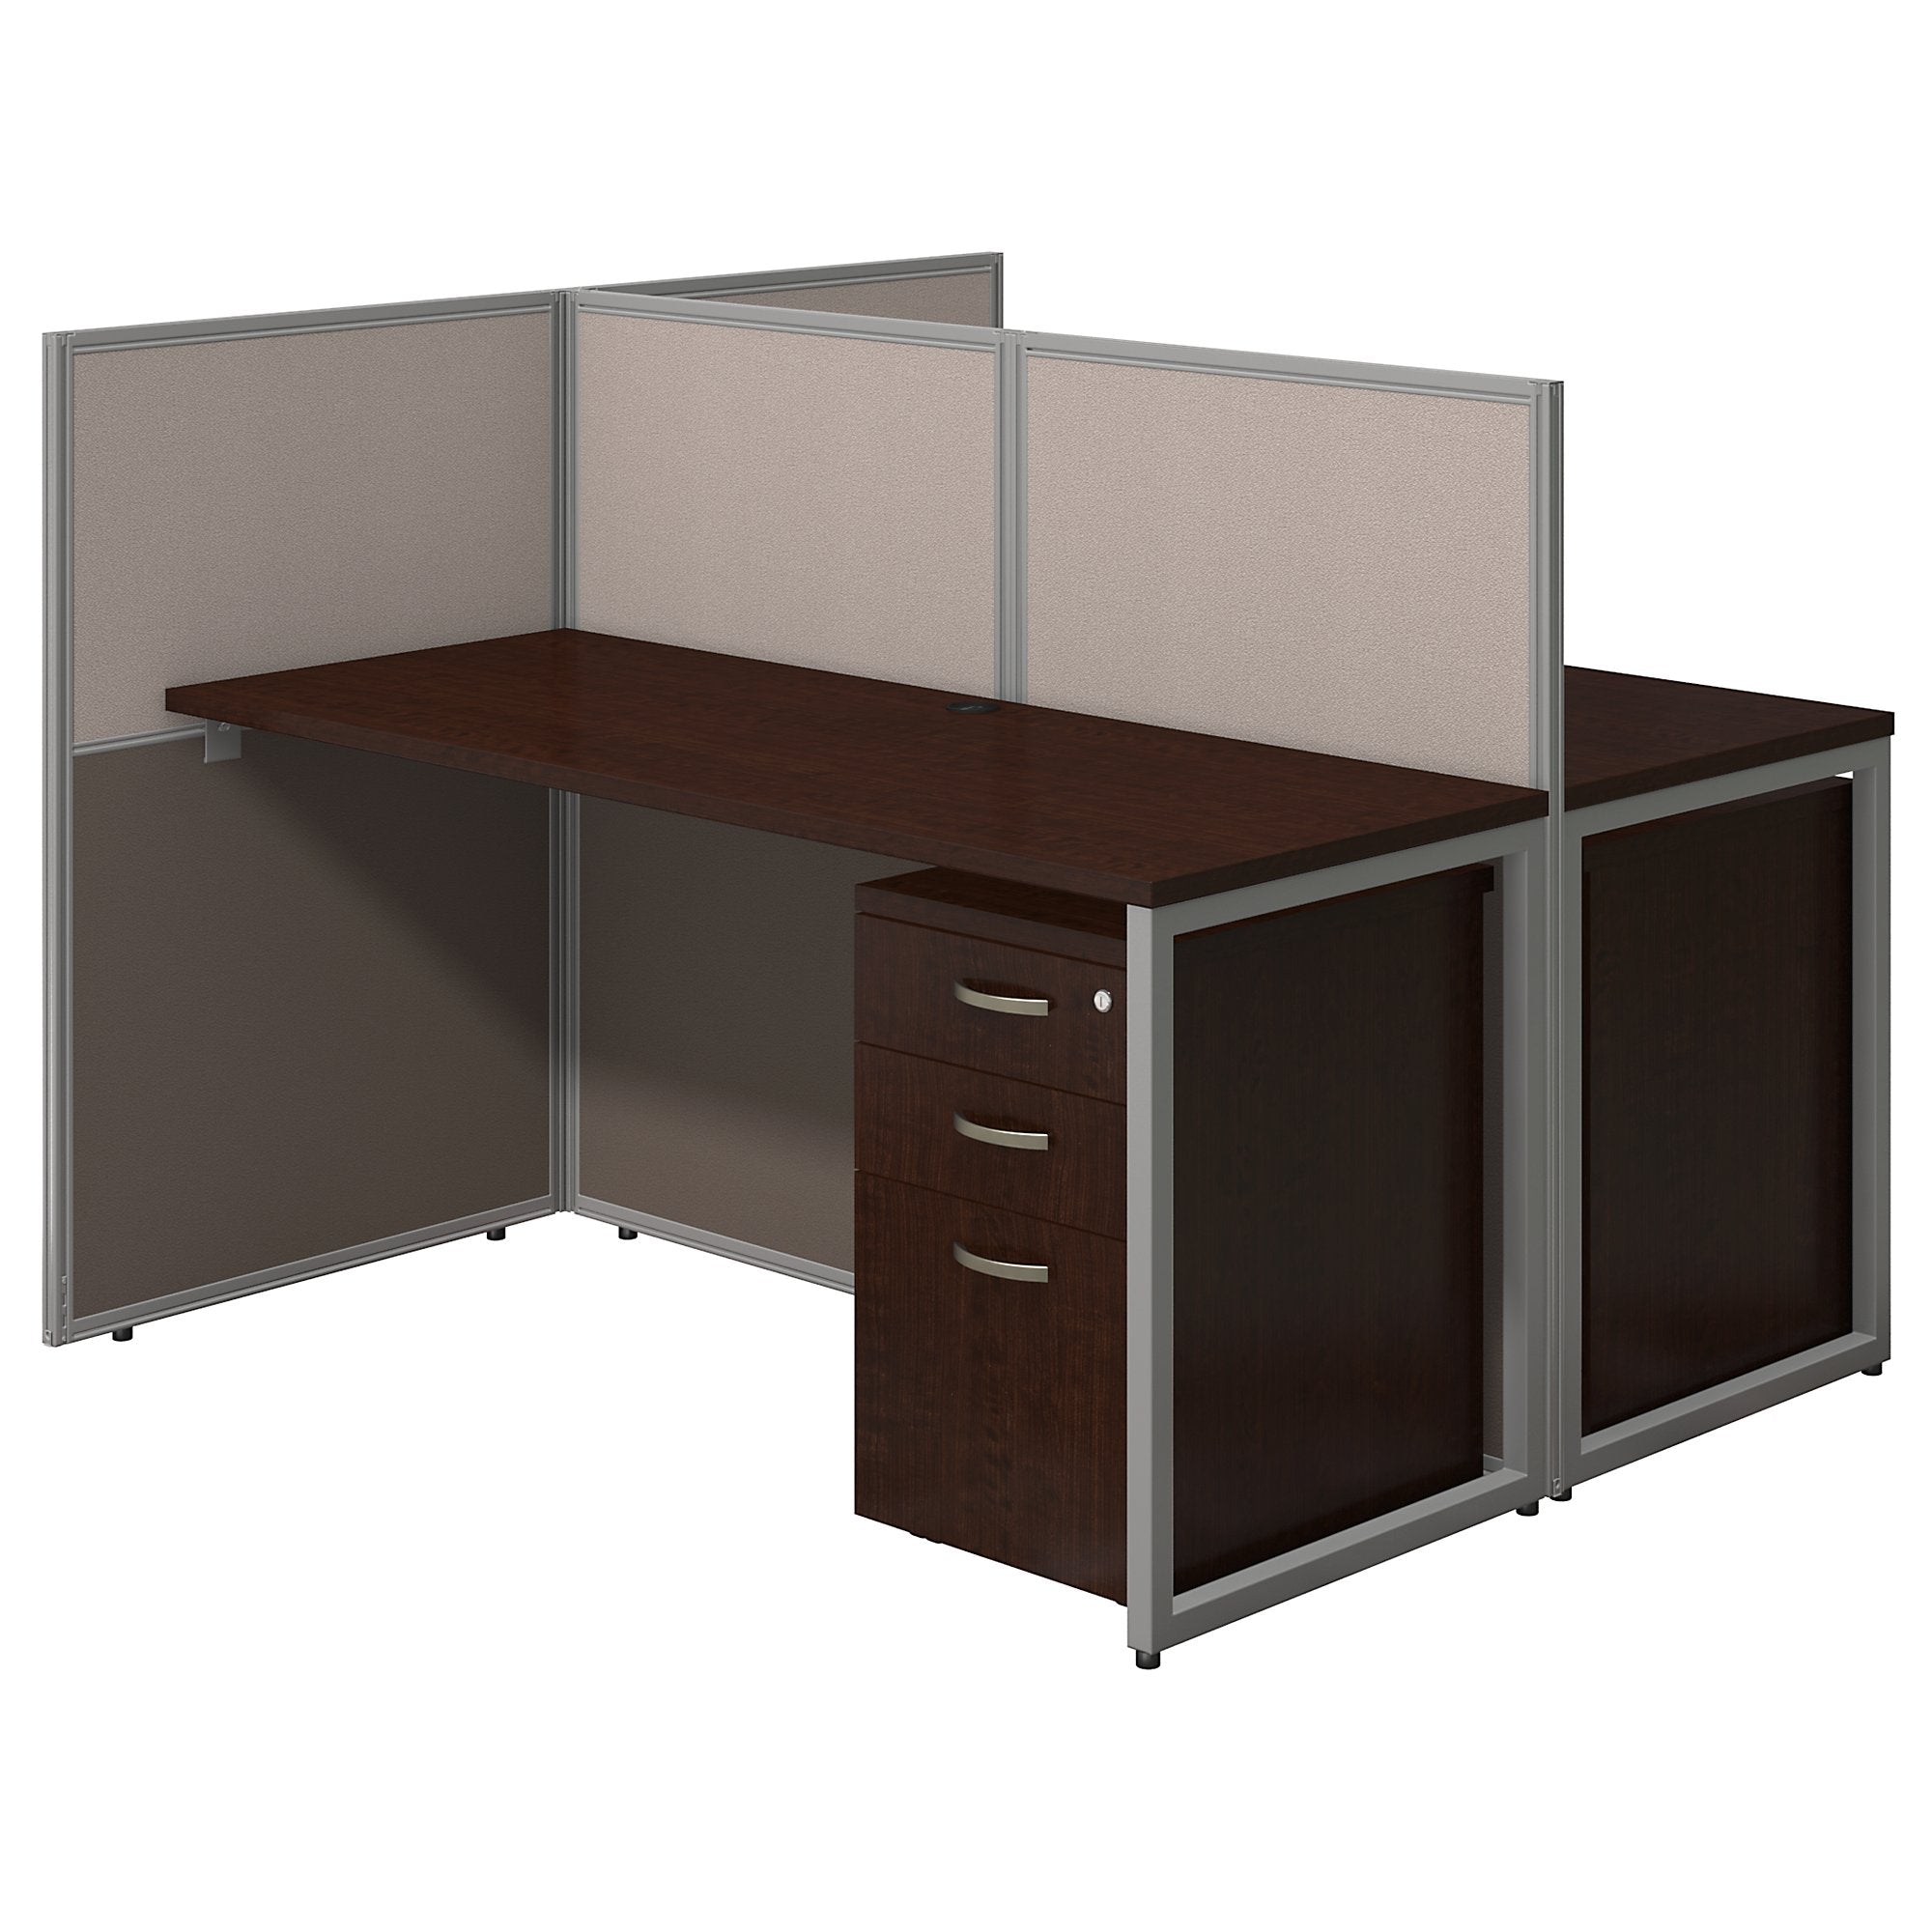 Bush Business Furniture Easy Office: 60W 2 Person Straight Desk Open Office with 3 Drawer Mobile Pedestals - Mocha Cherry